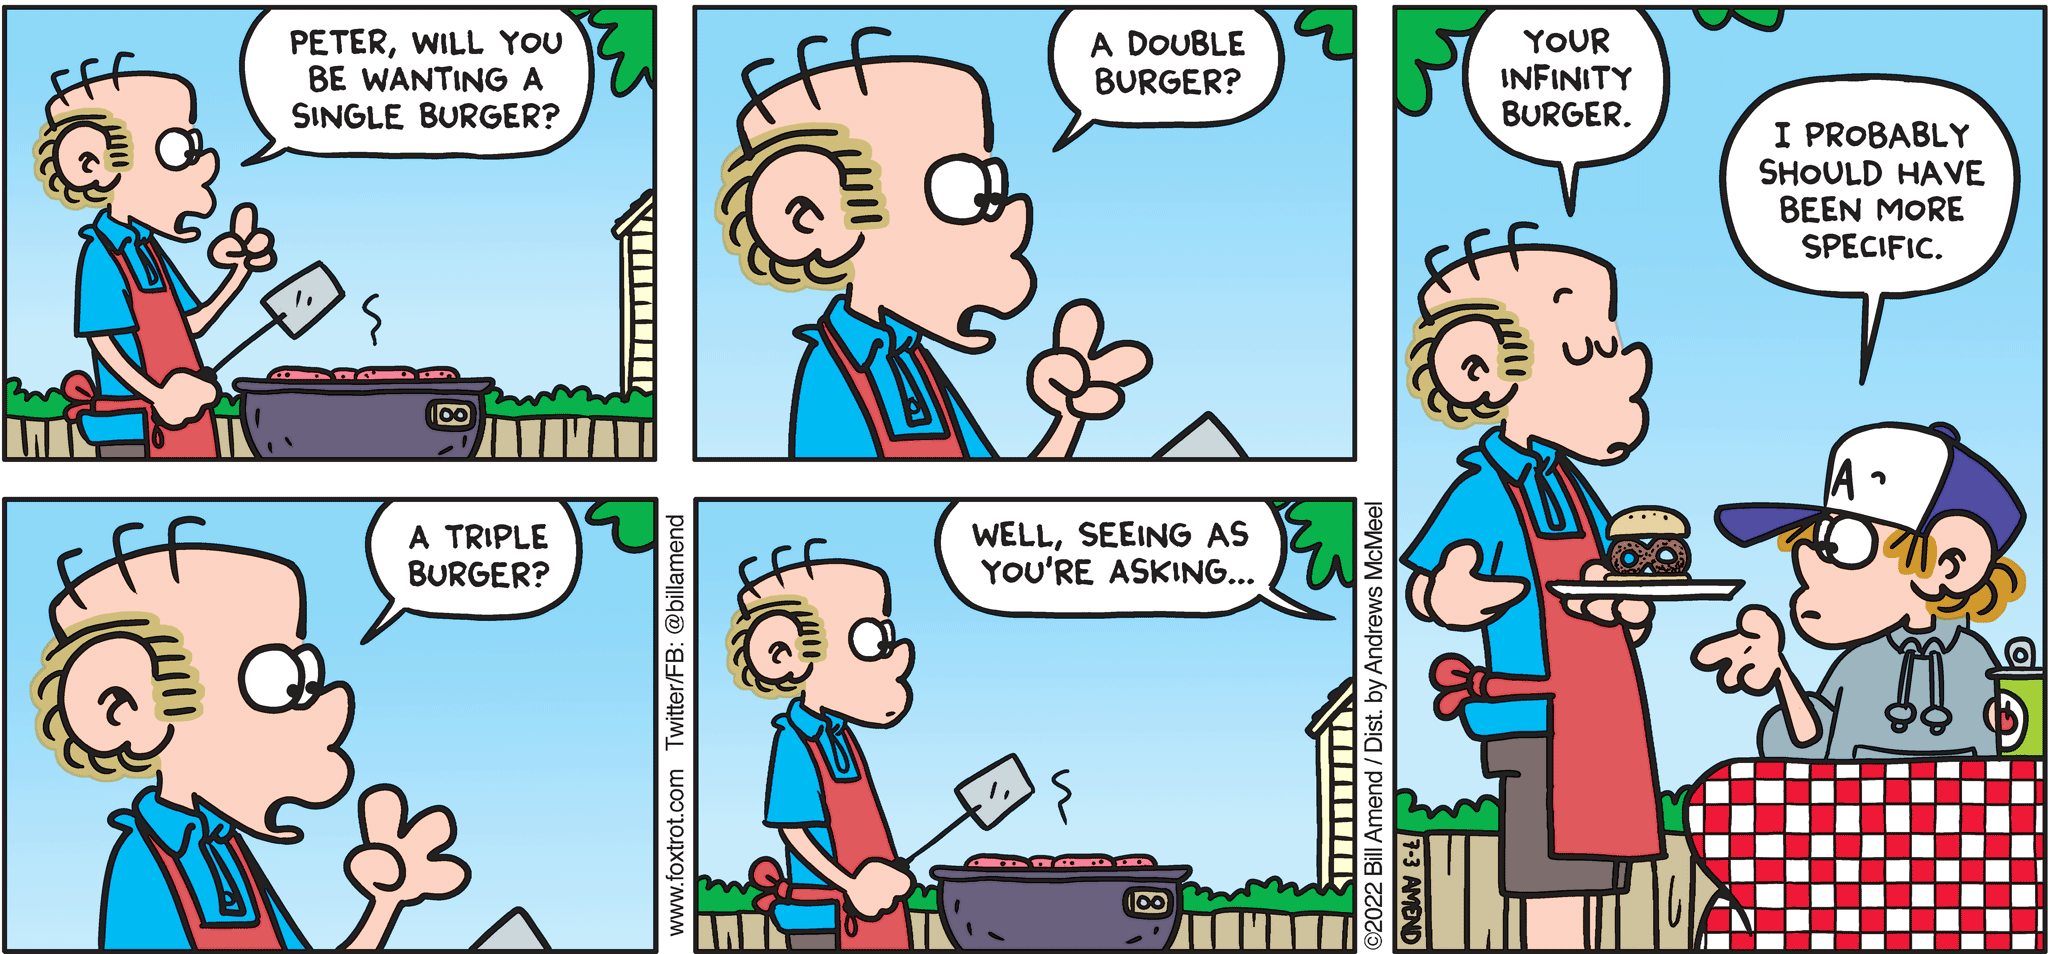 FoxTrot comic strip by Bill Amend - "Infinite Appetite" published July 3, 2022 - Transcript: Roger Fox: Peter, will you be wanting a single burger? A double burger? A triple burger? Well, seeing as you're asking... Your infinity burger. Peter Fox: I probably should have been specific. 